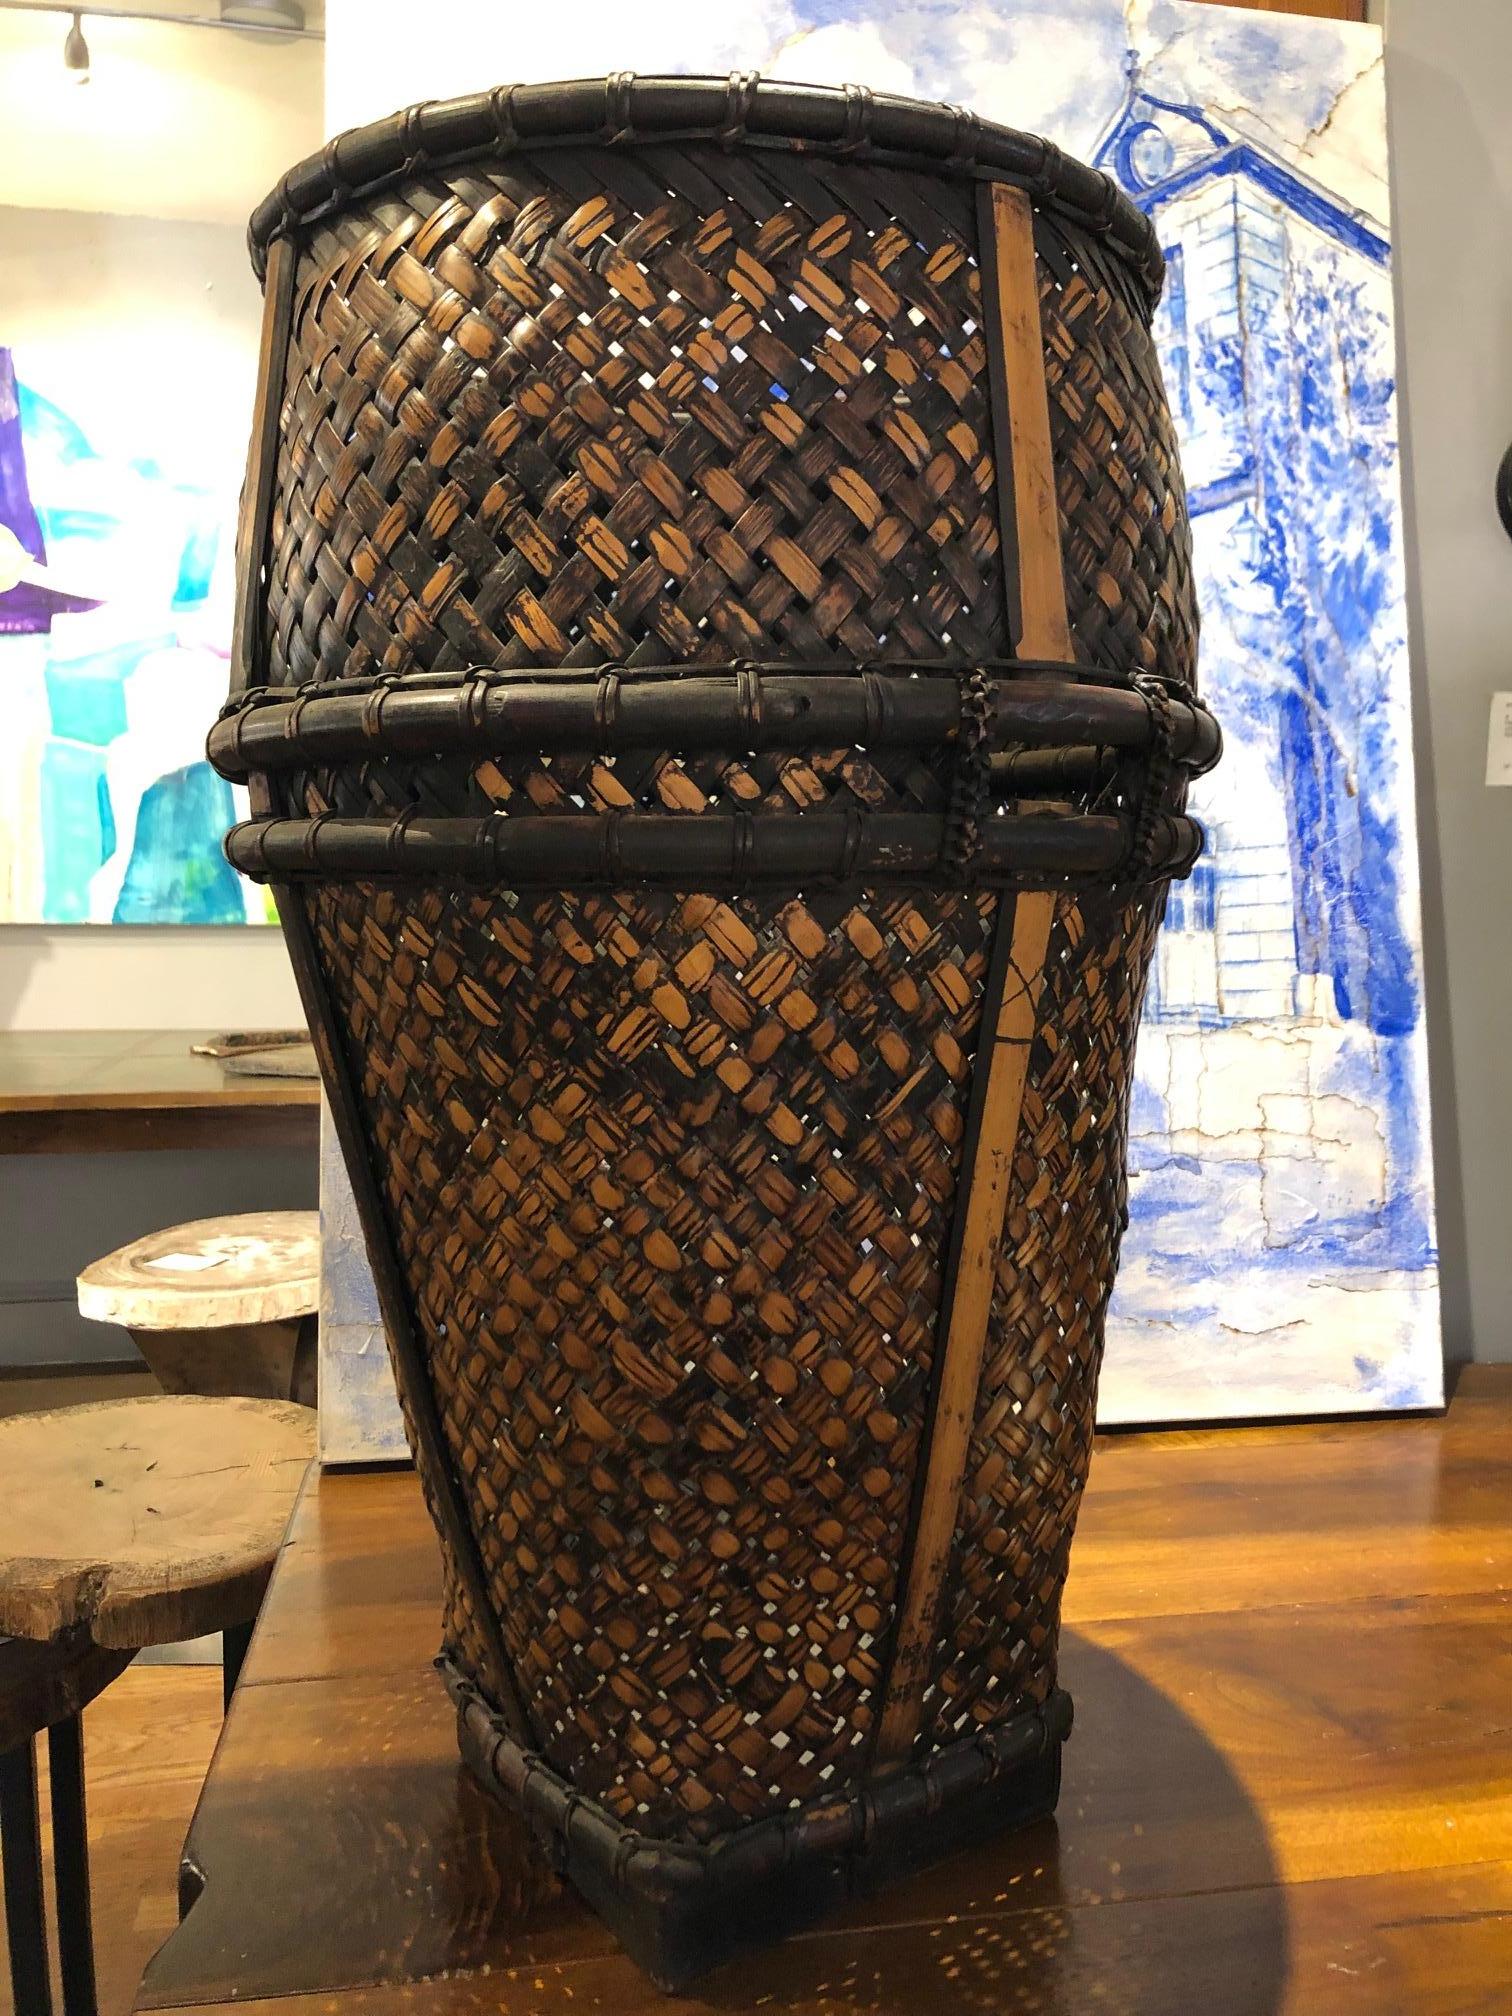 Beautiful handwoven Indonesian hauling basket made from rattan and bamboo with a remarkable deep color and patina. This Agrarian art makes for a beautiful display or storage piece in your home.,
Sulawesi, circa 1930.
Measures: 24